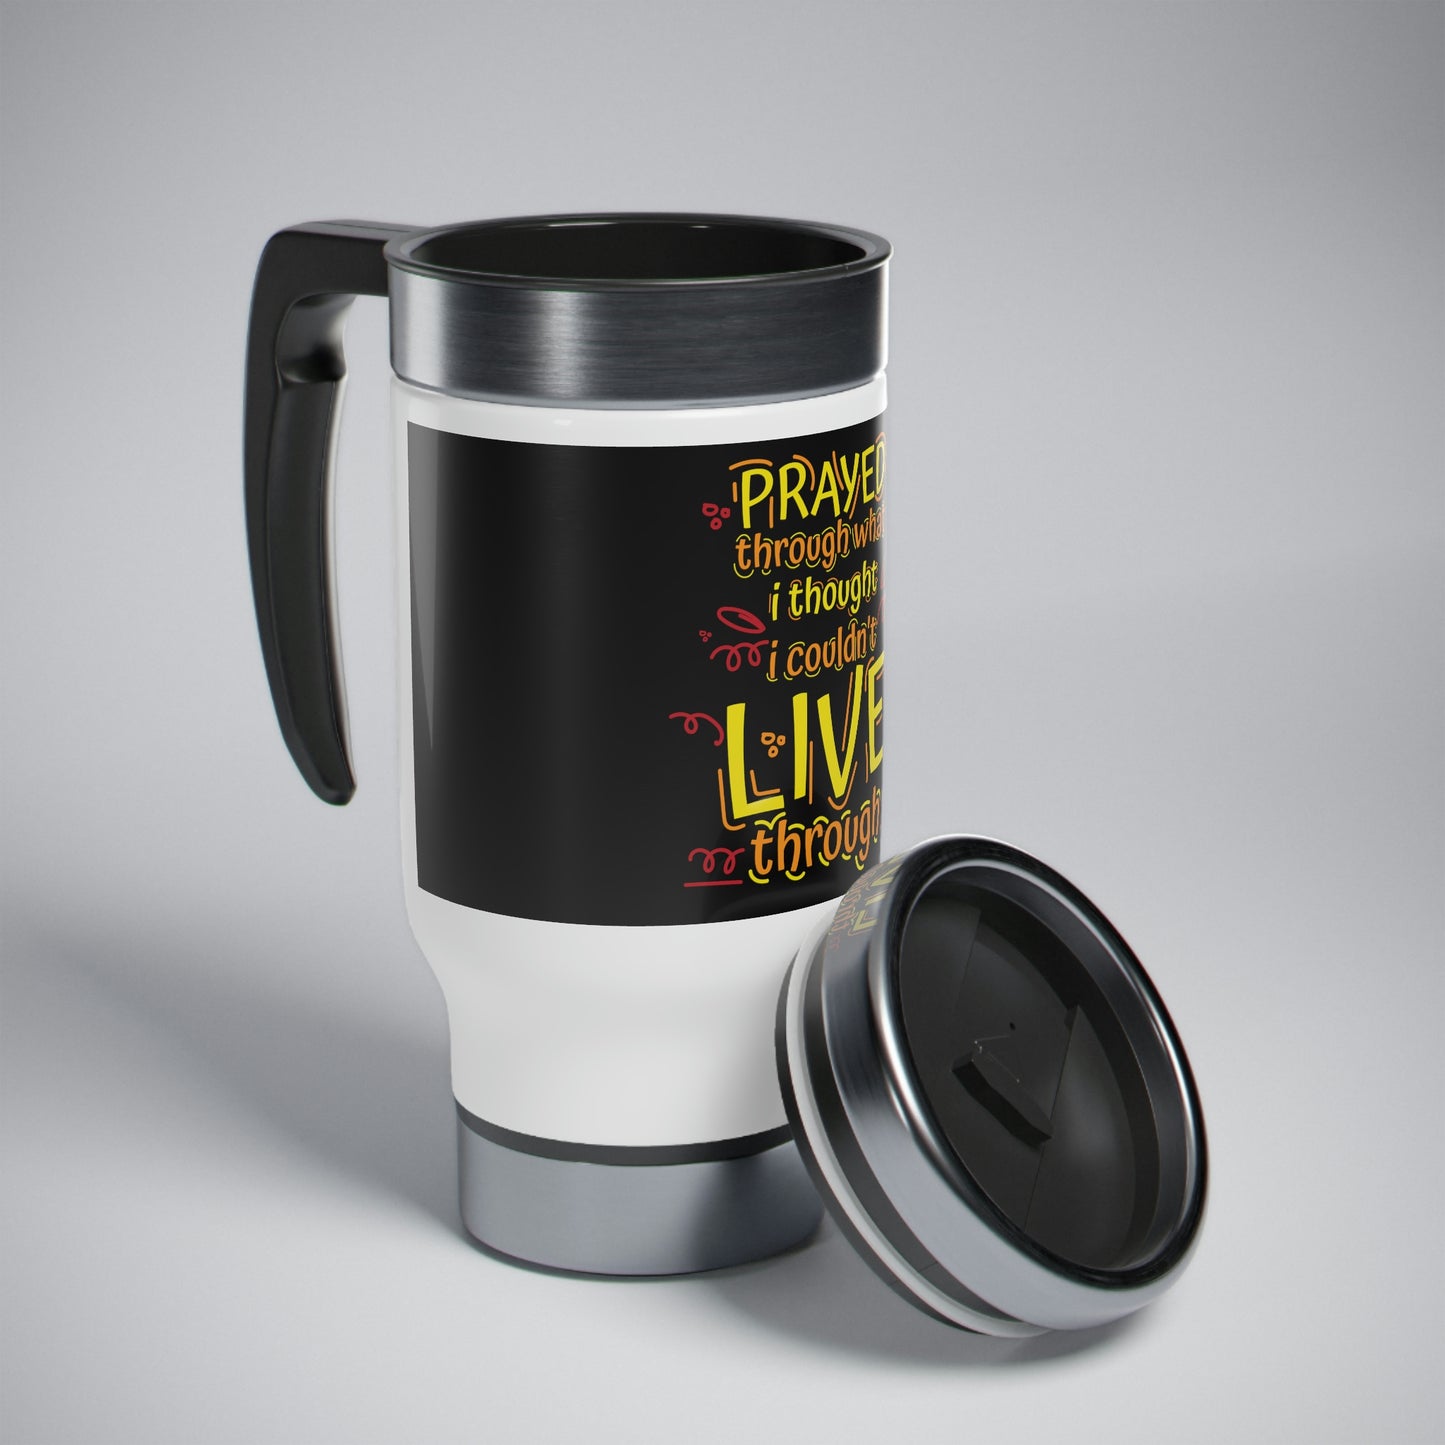 Prayed Through What I Thought I Couldn't Live Through Steel Travel Mug with Handle, 14oz